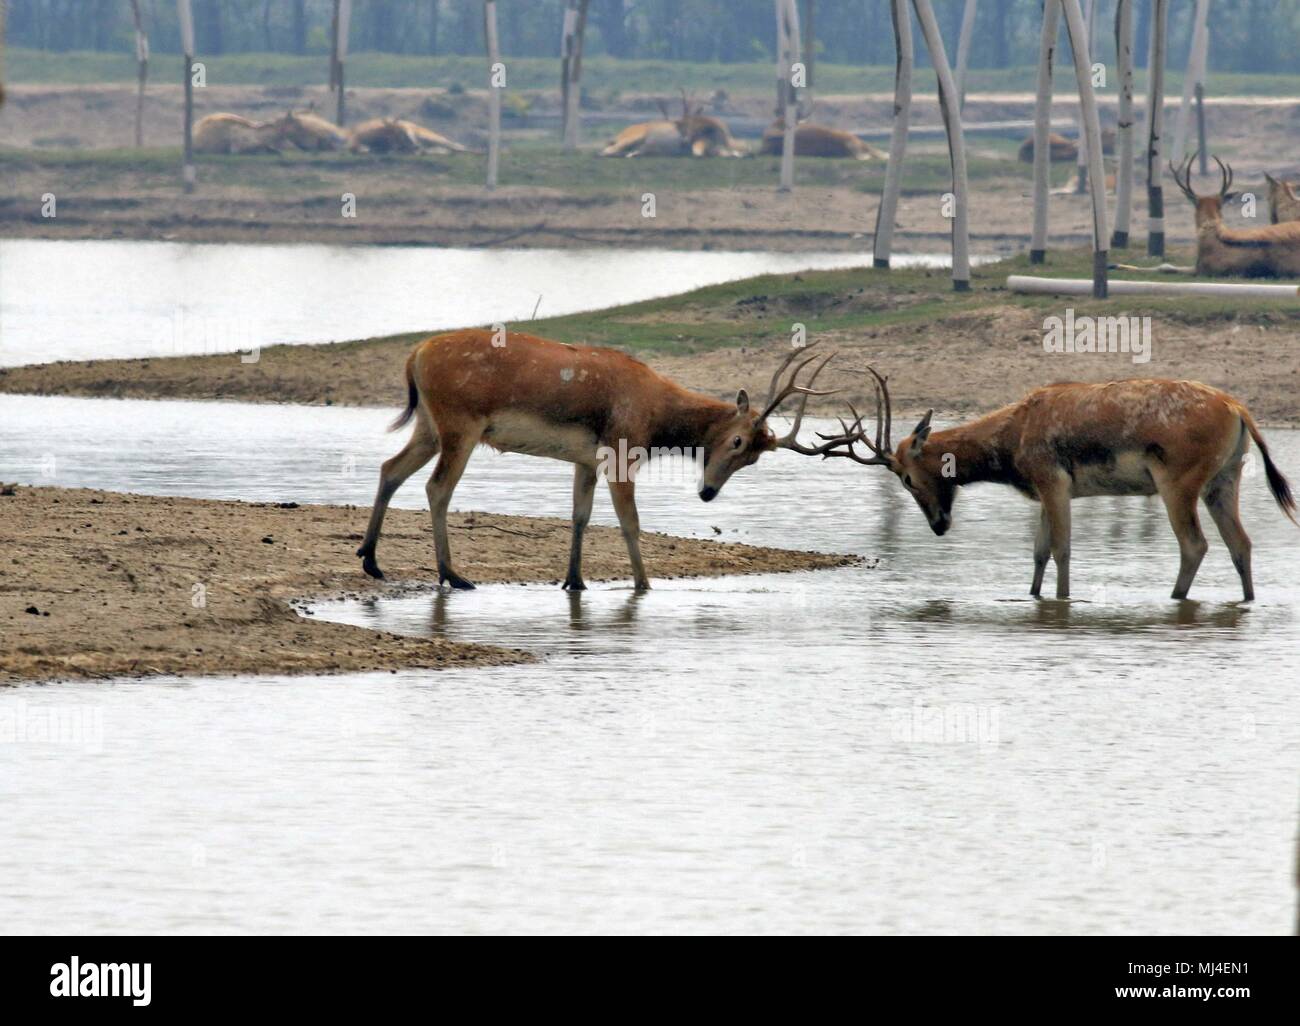 Yancheng, Yancheng, China. 4th May, 2018. The Pere David's deer in Yancheng, east China's Jiangsu Province, May 4th, 2018. The Pere David's deer (Elaphurus davidianus), also known as the milu or elaphure, is a species of deer that are mostly found in captivity. This semiaquatic animal prefers marshland, and is native to the subtropics of China. It grazes mainly on grass and aquatic plants. It is the only extant member of the genus Elaphurus. Credit: SIPA Asia/ZUMA Wire/Alamy Live News Stock Photo